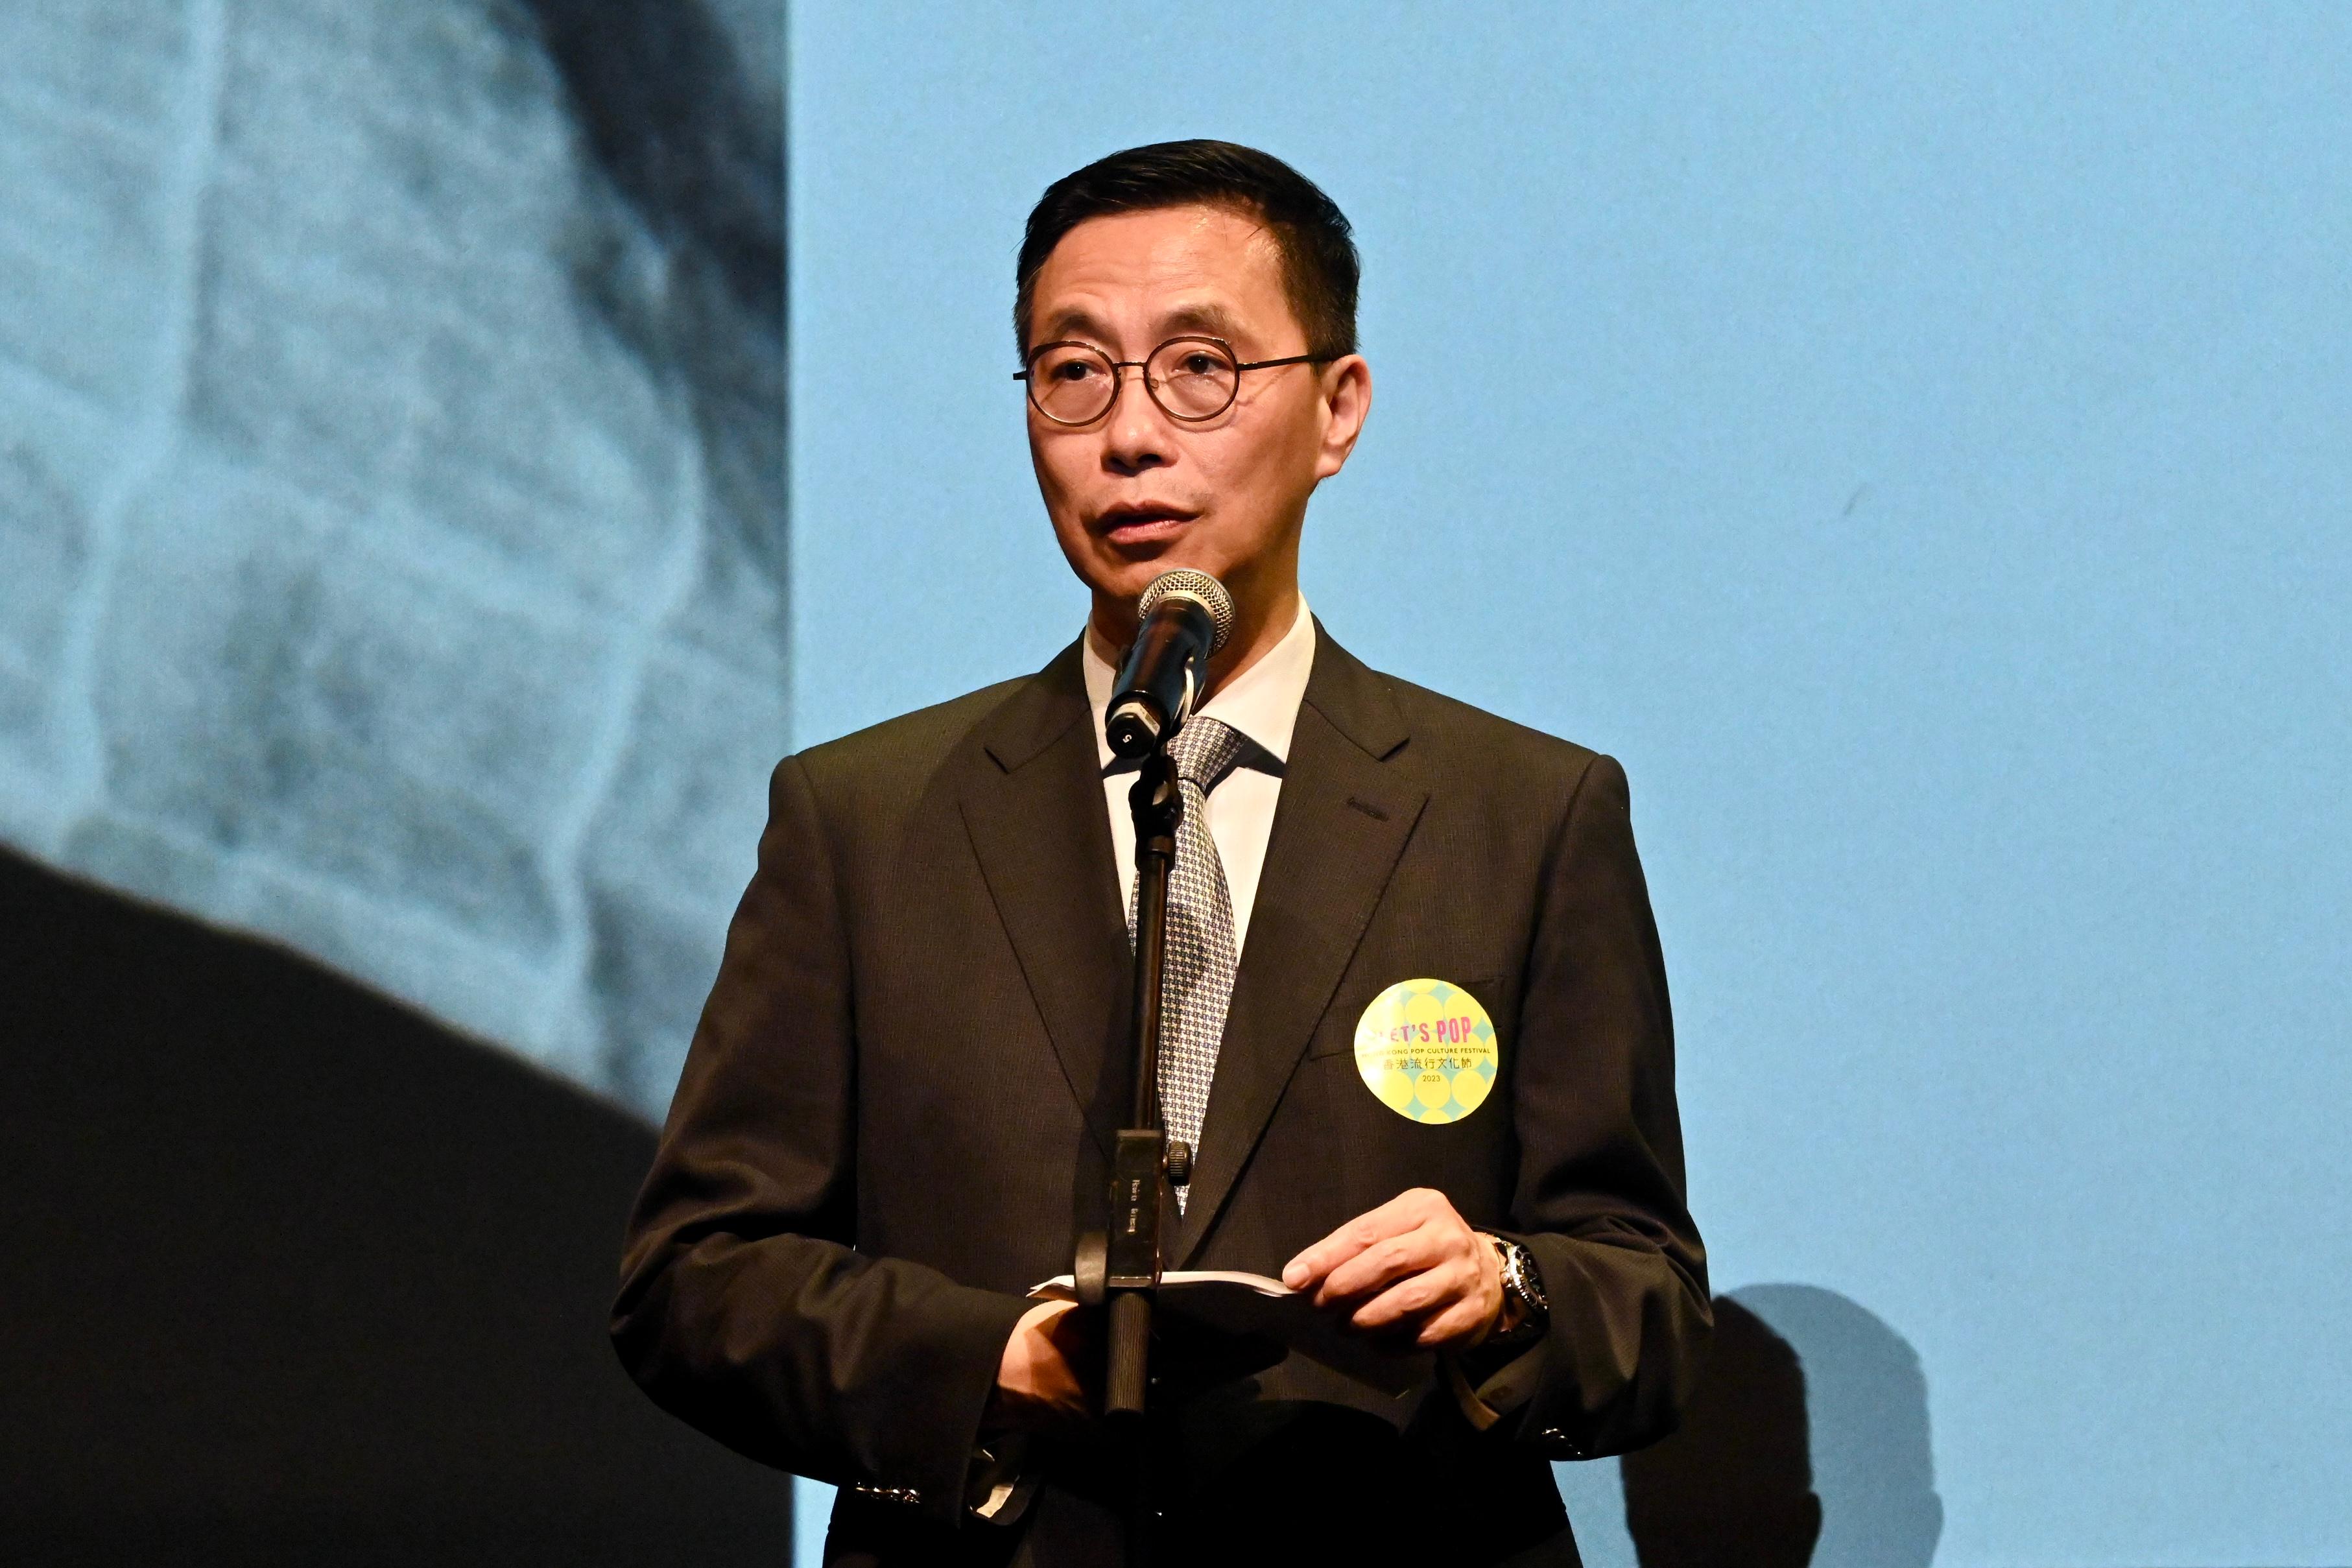 Organised by the Leisure and Cultural Services Department, the opening ceremony of the Hong Kong Pop Culture Festival 2023 was held at the Grand Theatre of the Hong Kong Cultural Centre today (April 22). Photo shows the Secretary for Culture, Sports and Tourism, Mr Kevin Yeung, addressing the ceremony.
